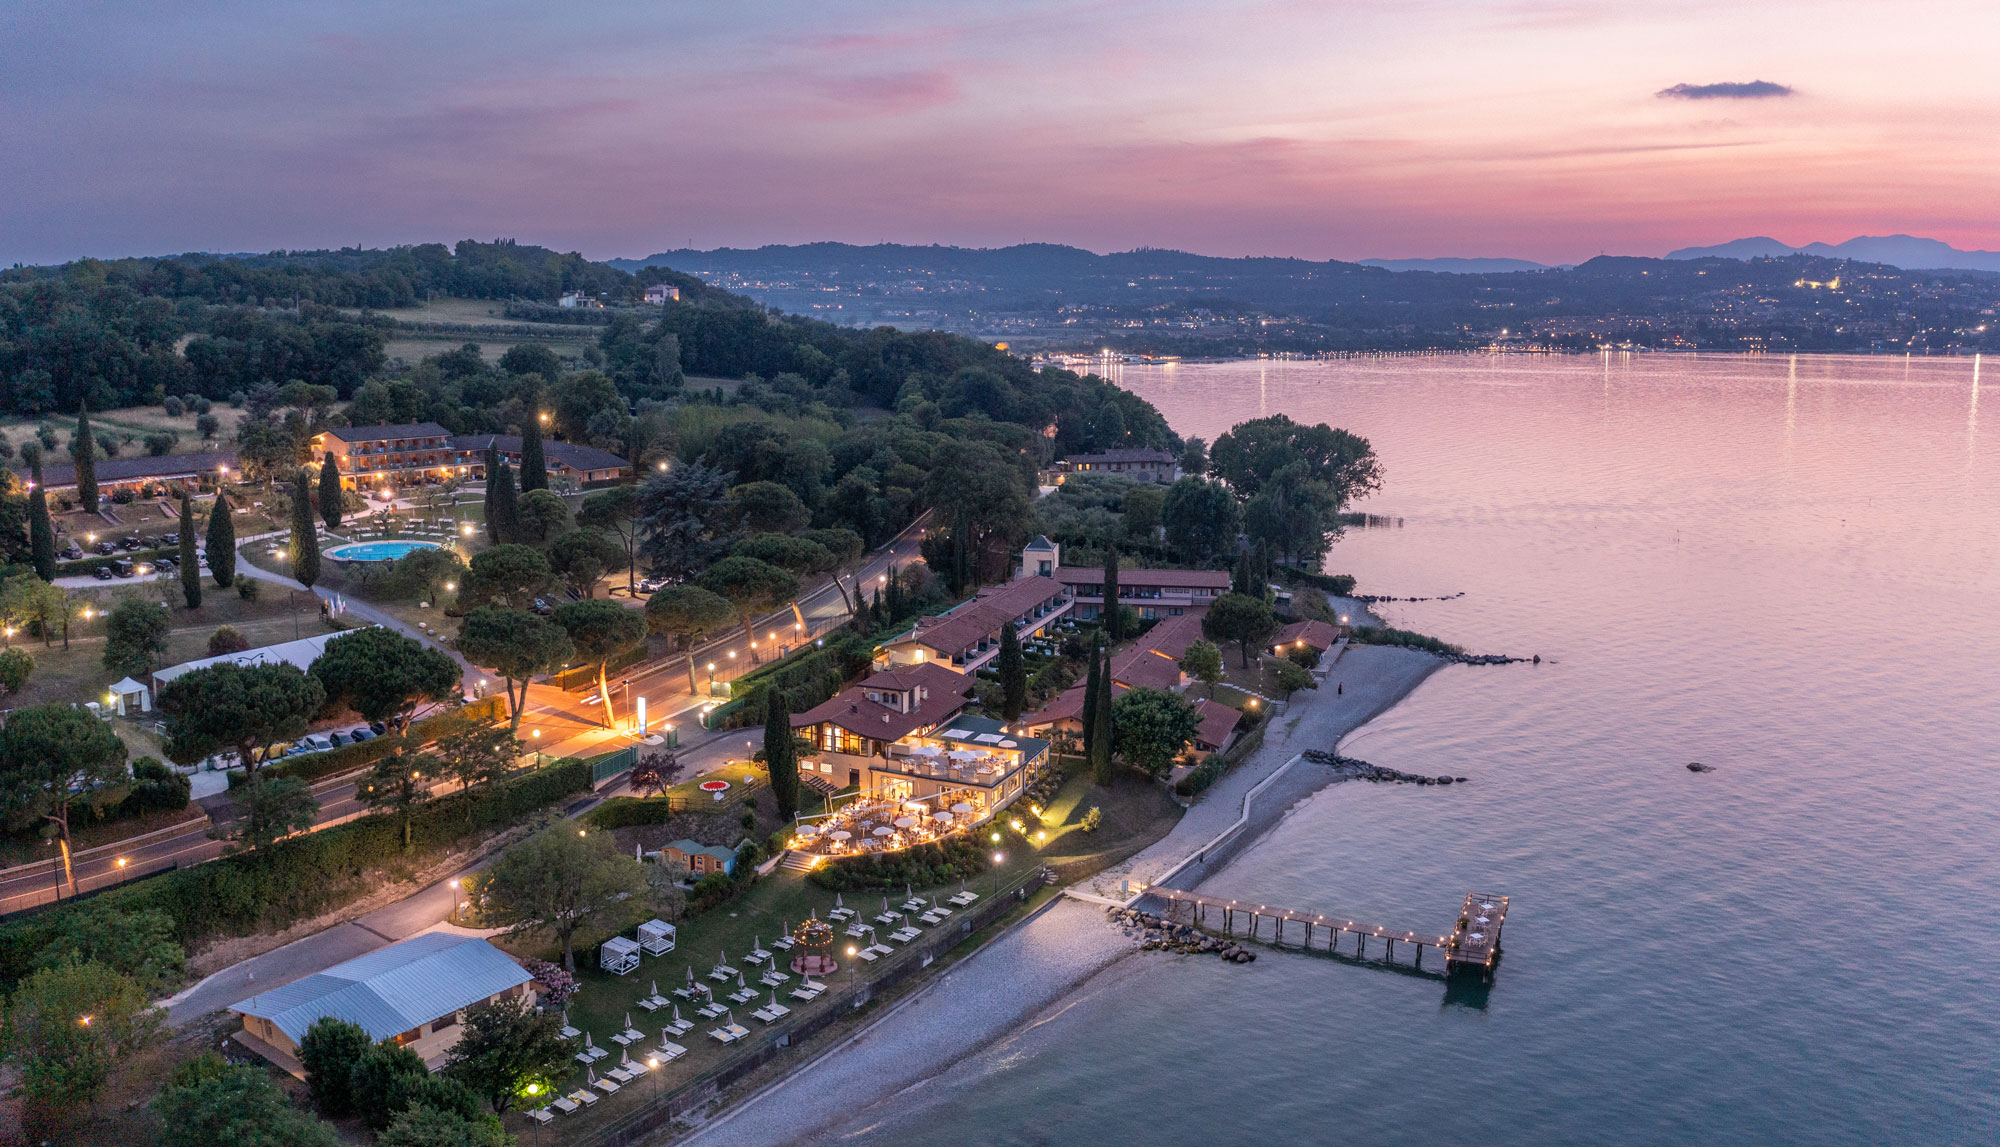 All the information you need about Desenzano Lake Village